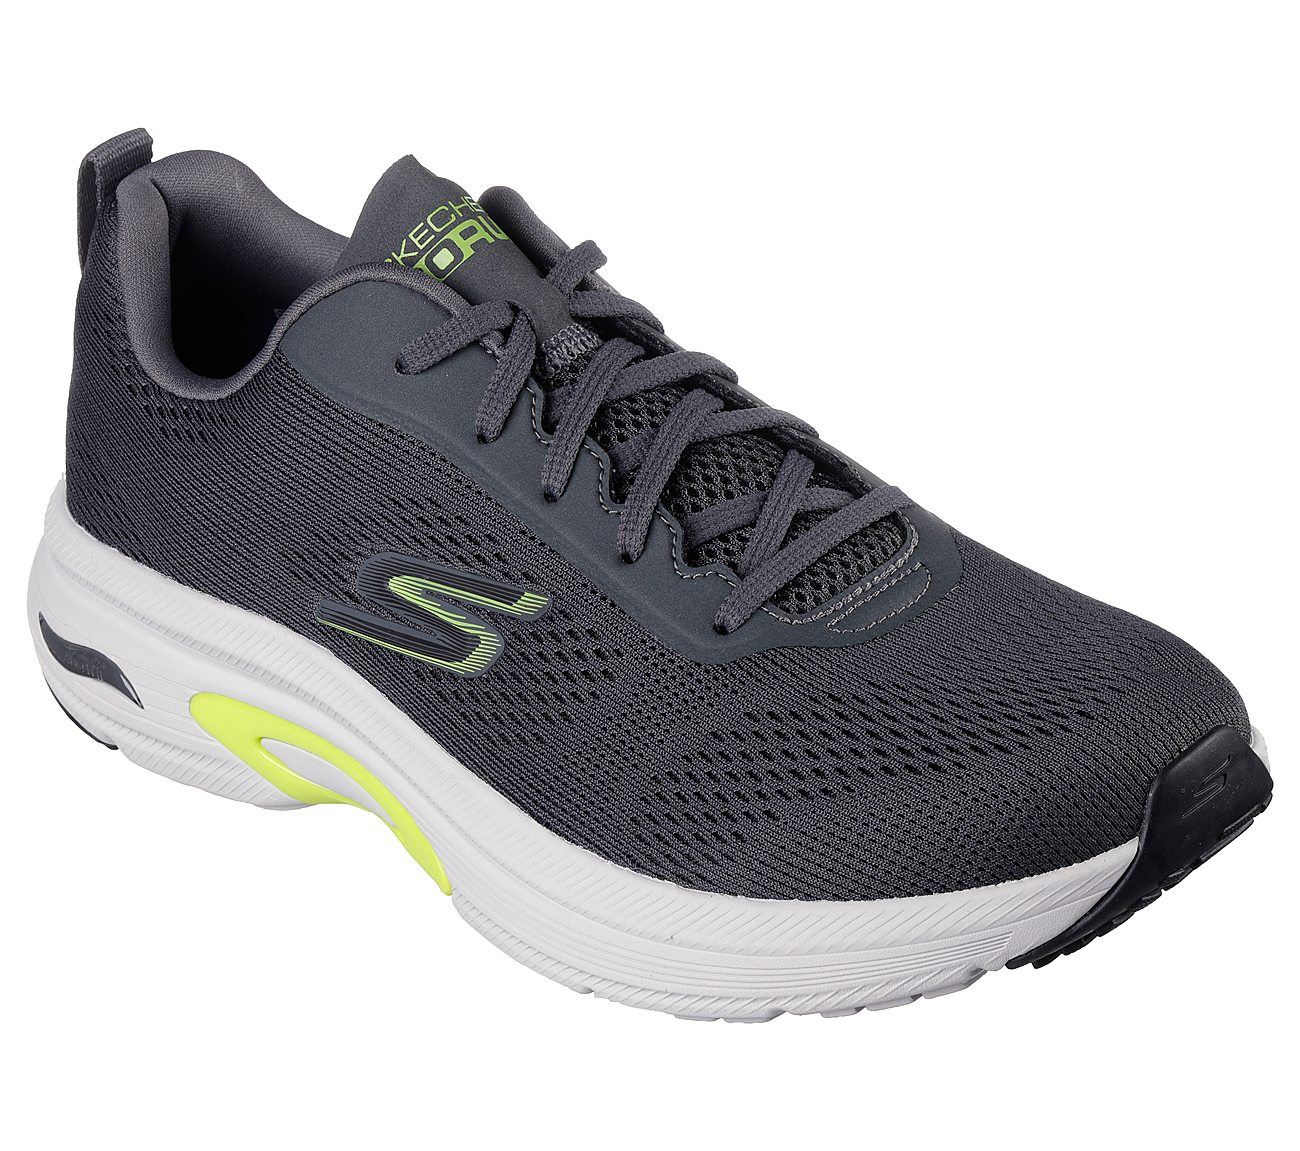 GO RUN ARCH FIT, CHARCOAL/BLACK Footwear Lateral View